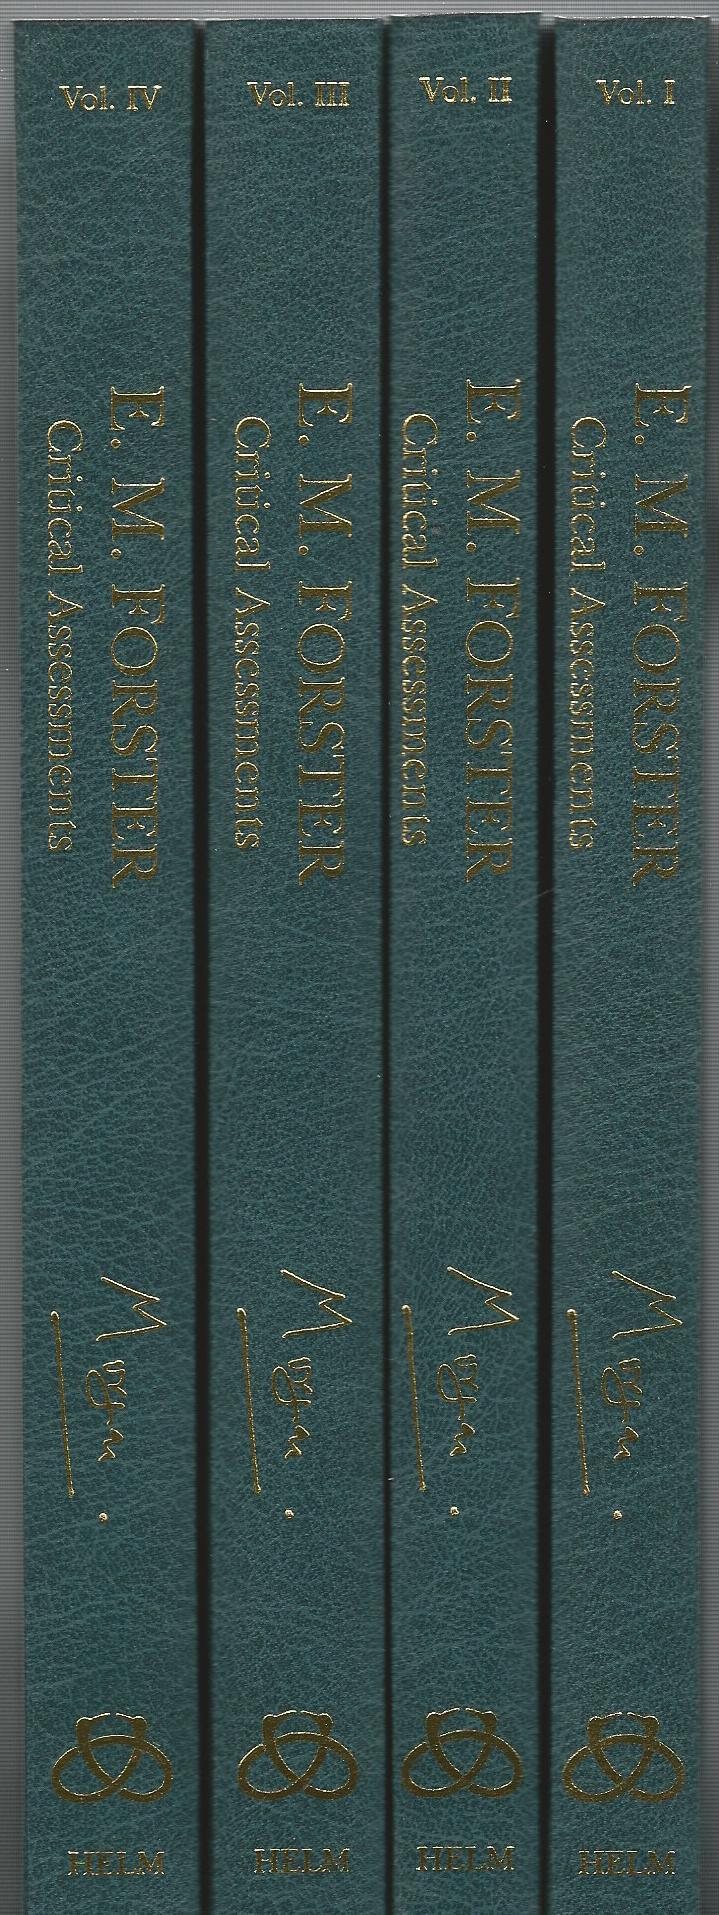 Image for E.M.Forster: Critical Assessments - Four Volumes Complete (Critical Assessments of Writers in English)